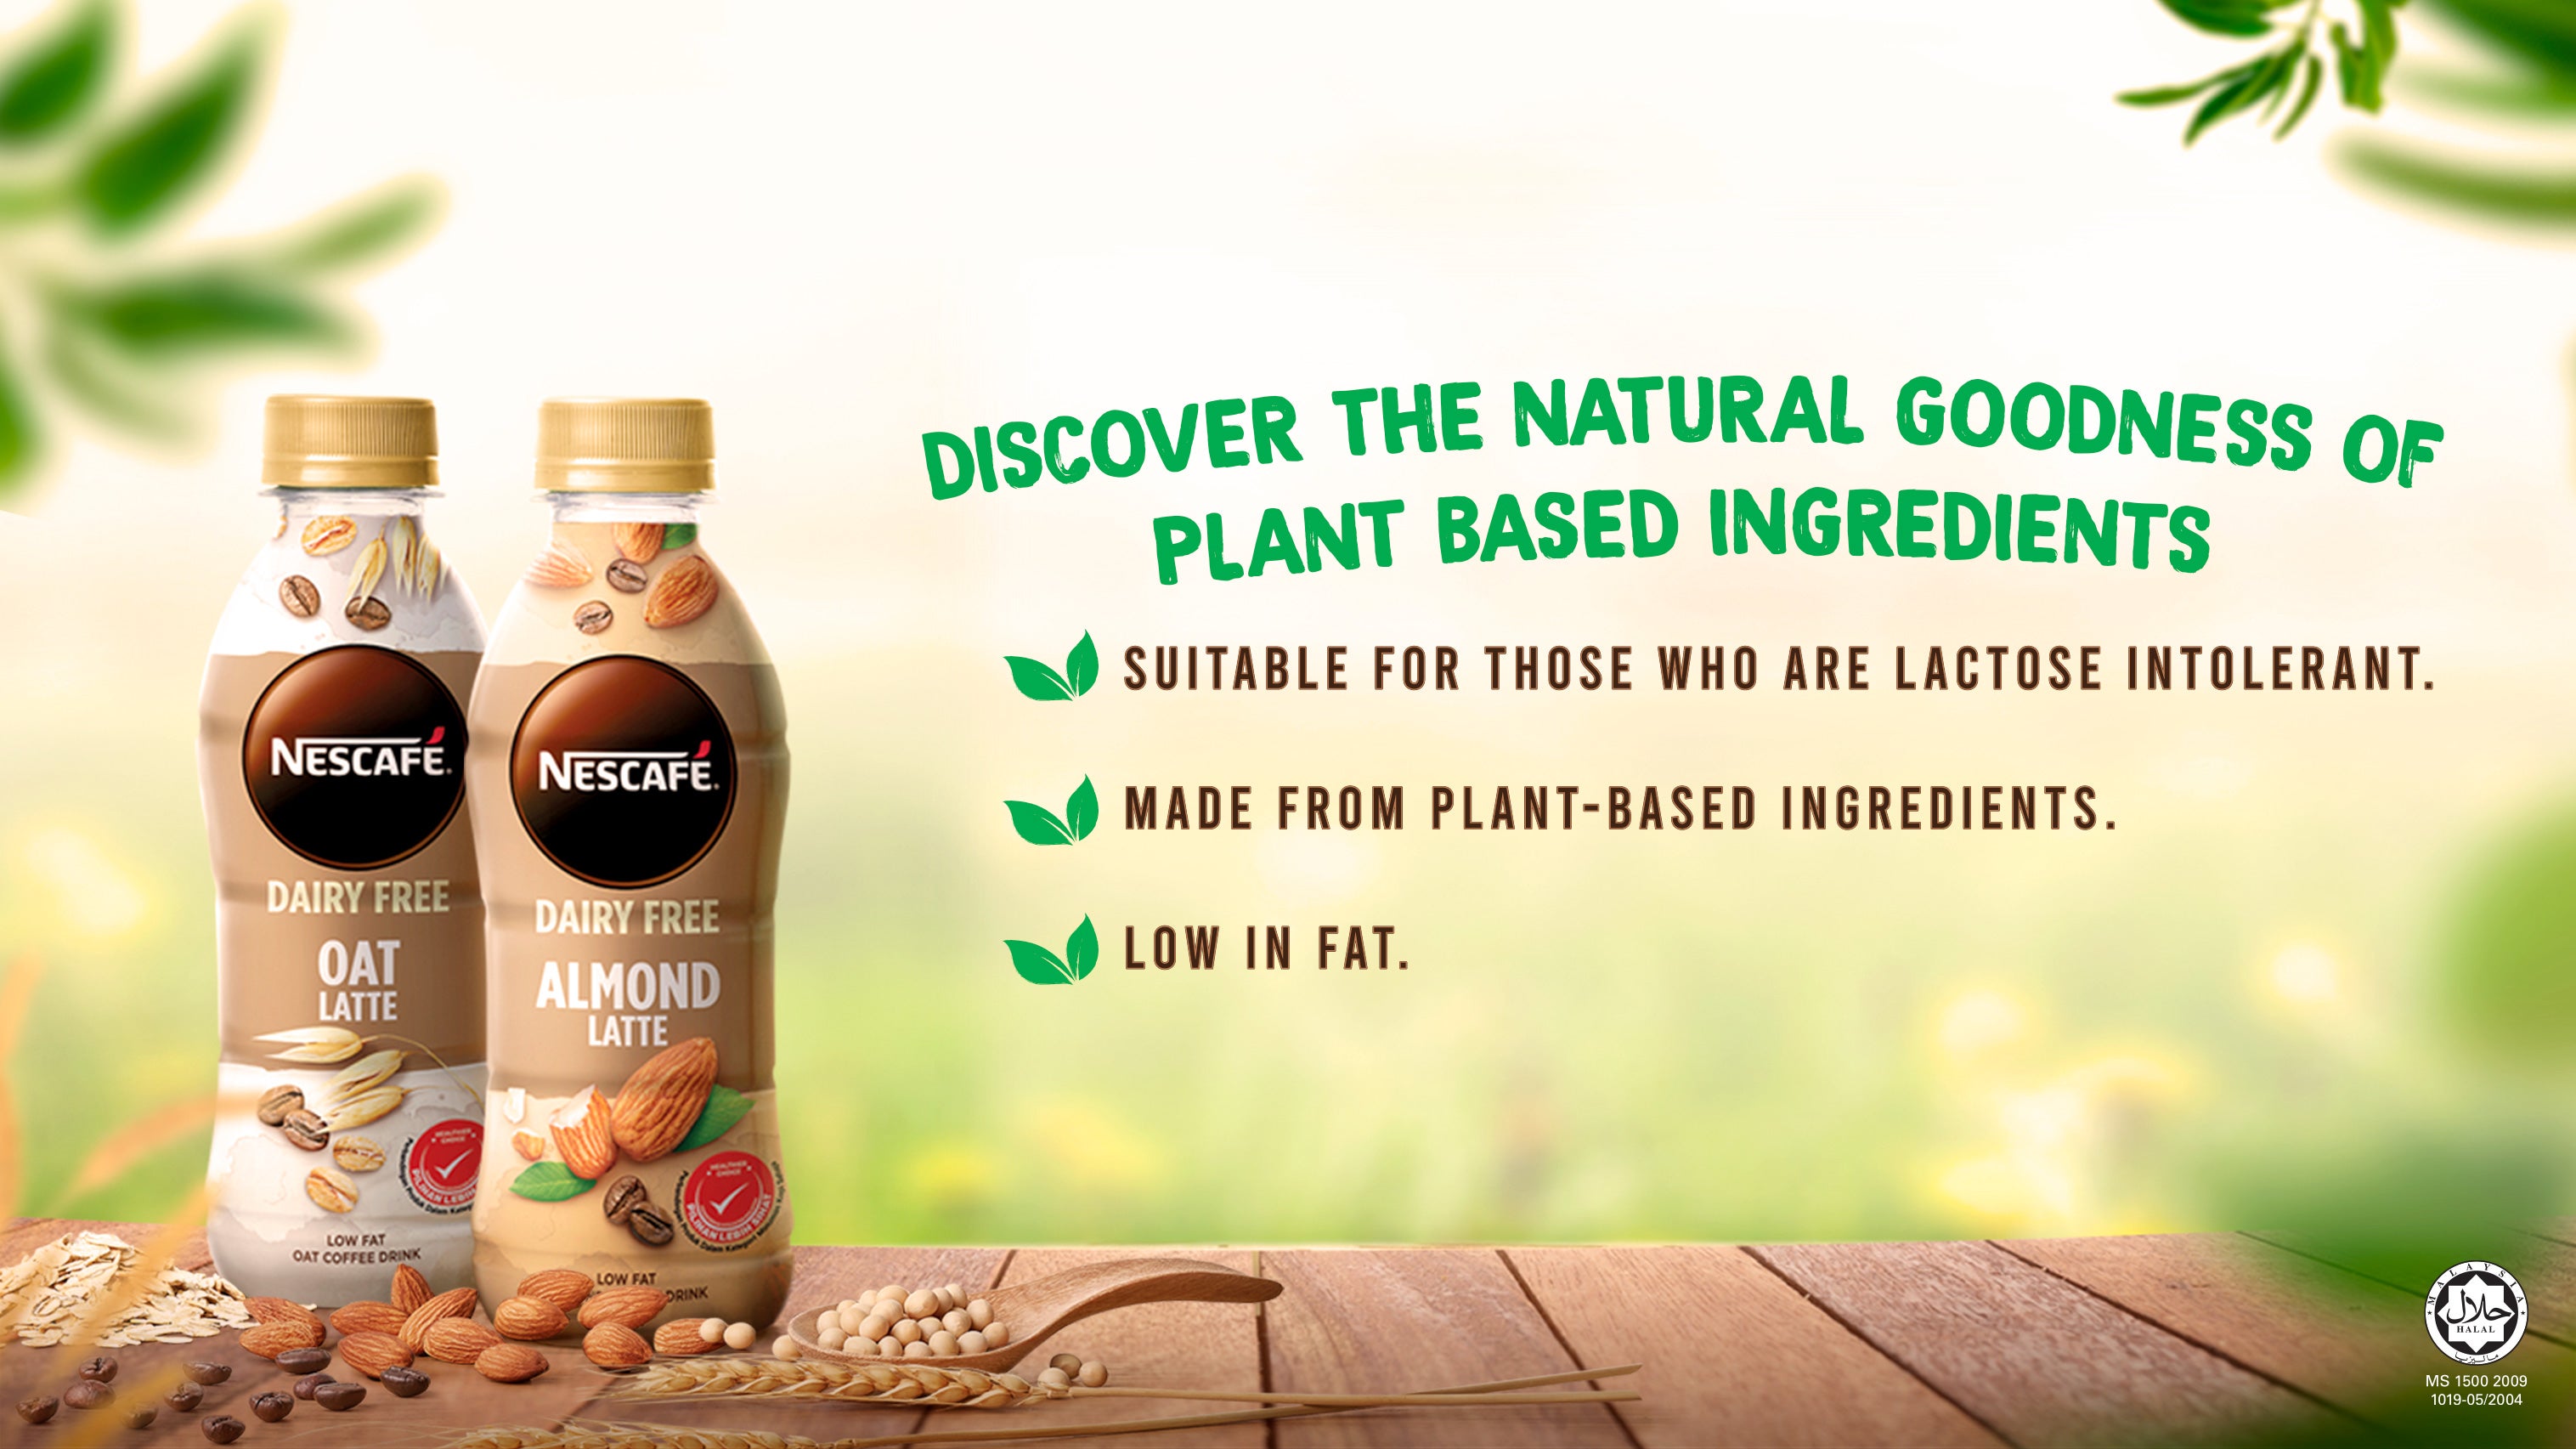 DISCOVER THE NATURAL GOODNESS OF PLANT BASED INGREDIENTS |  - suitable for those who are lactose intolerant. - made from plant-based ingredients. - low in fat.